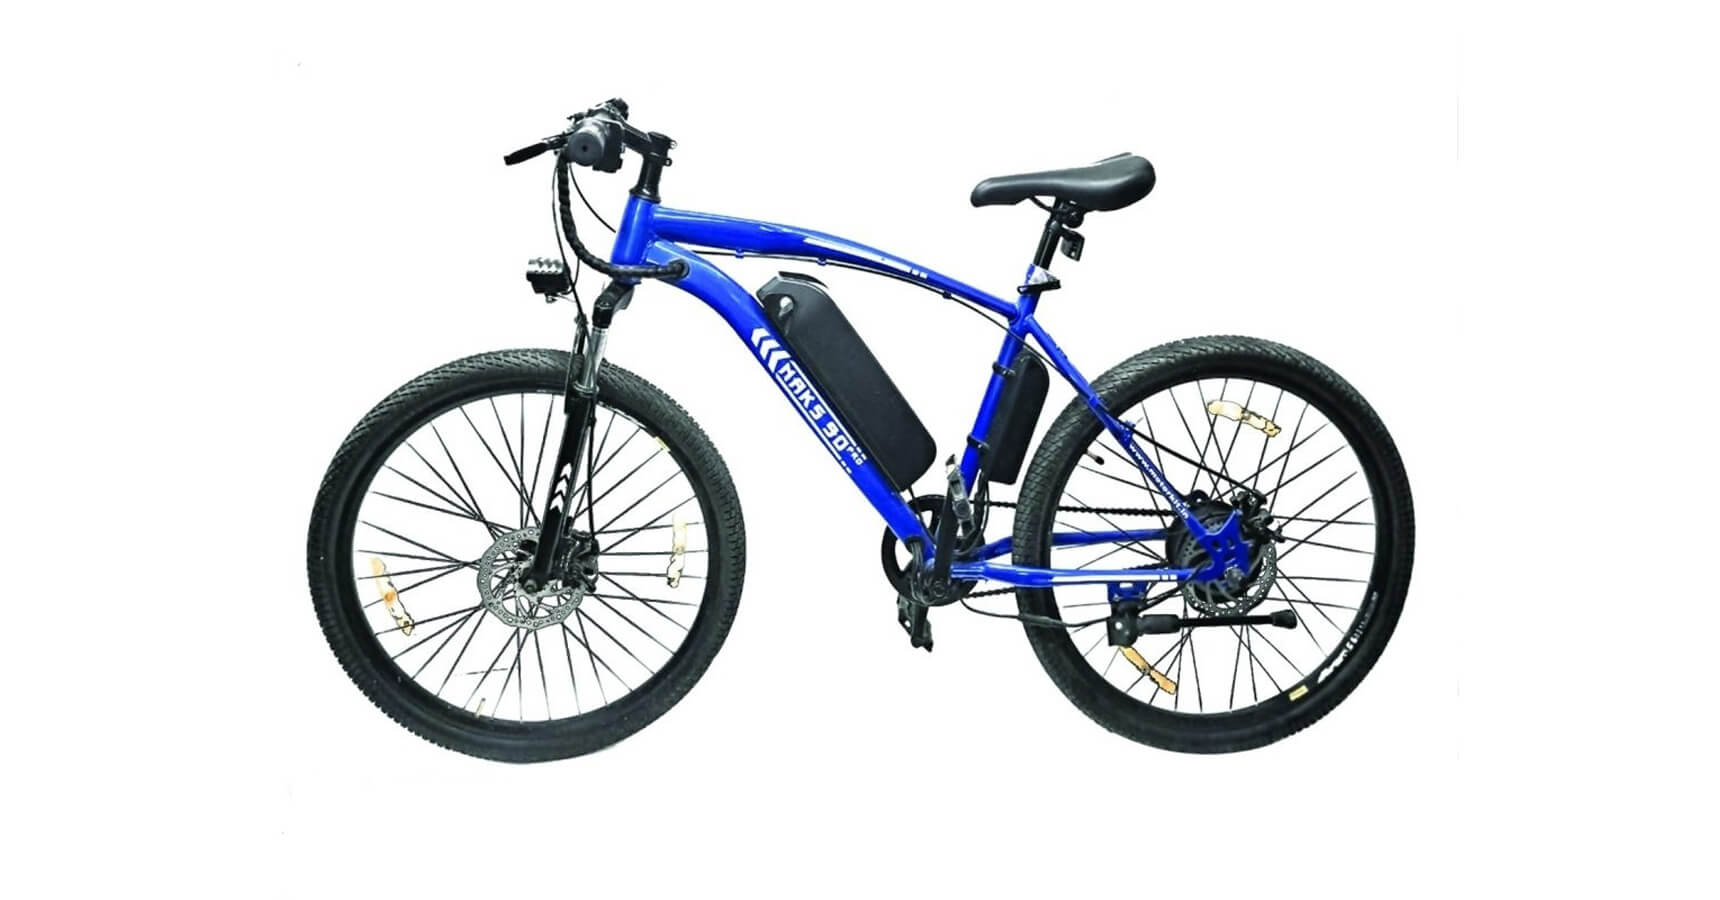 NAKS-90 Pro Electric Bicycle Launched